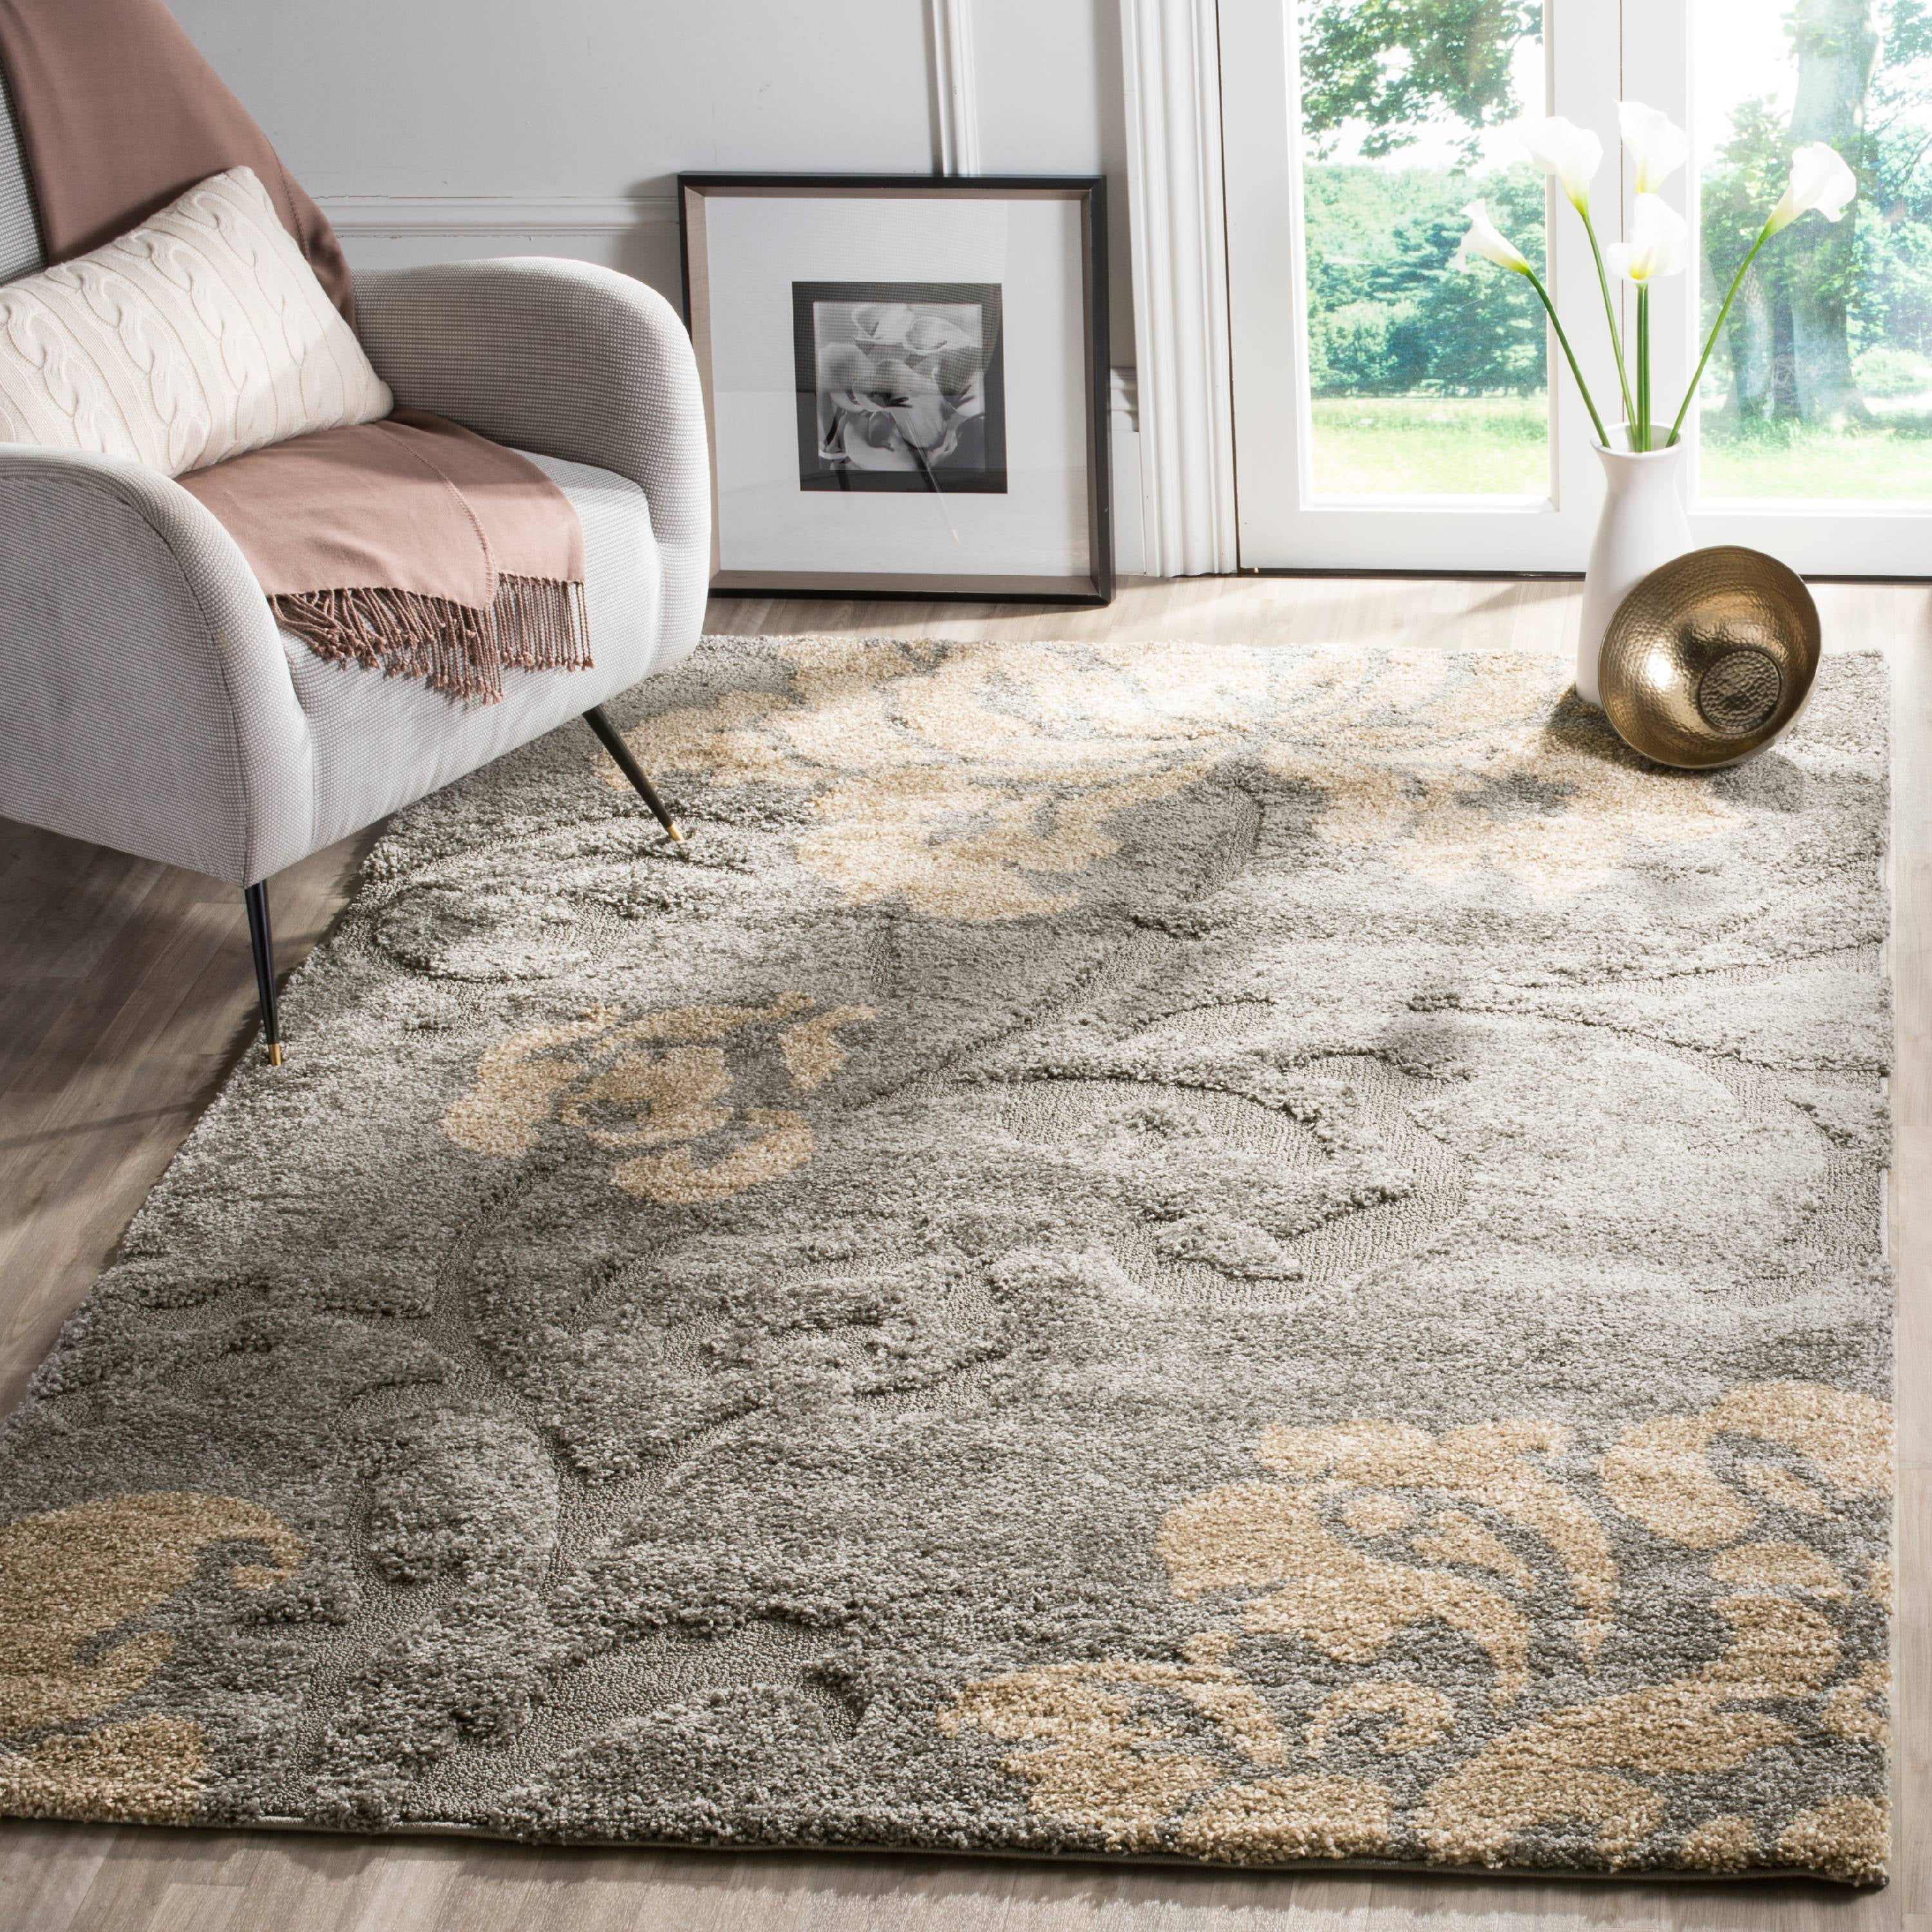 Beautiful Brand New Beige Brown Classic Thick dense Area Rugs Carpet Mat 